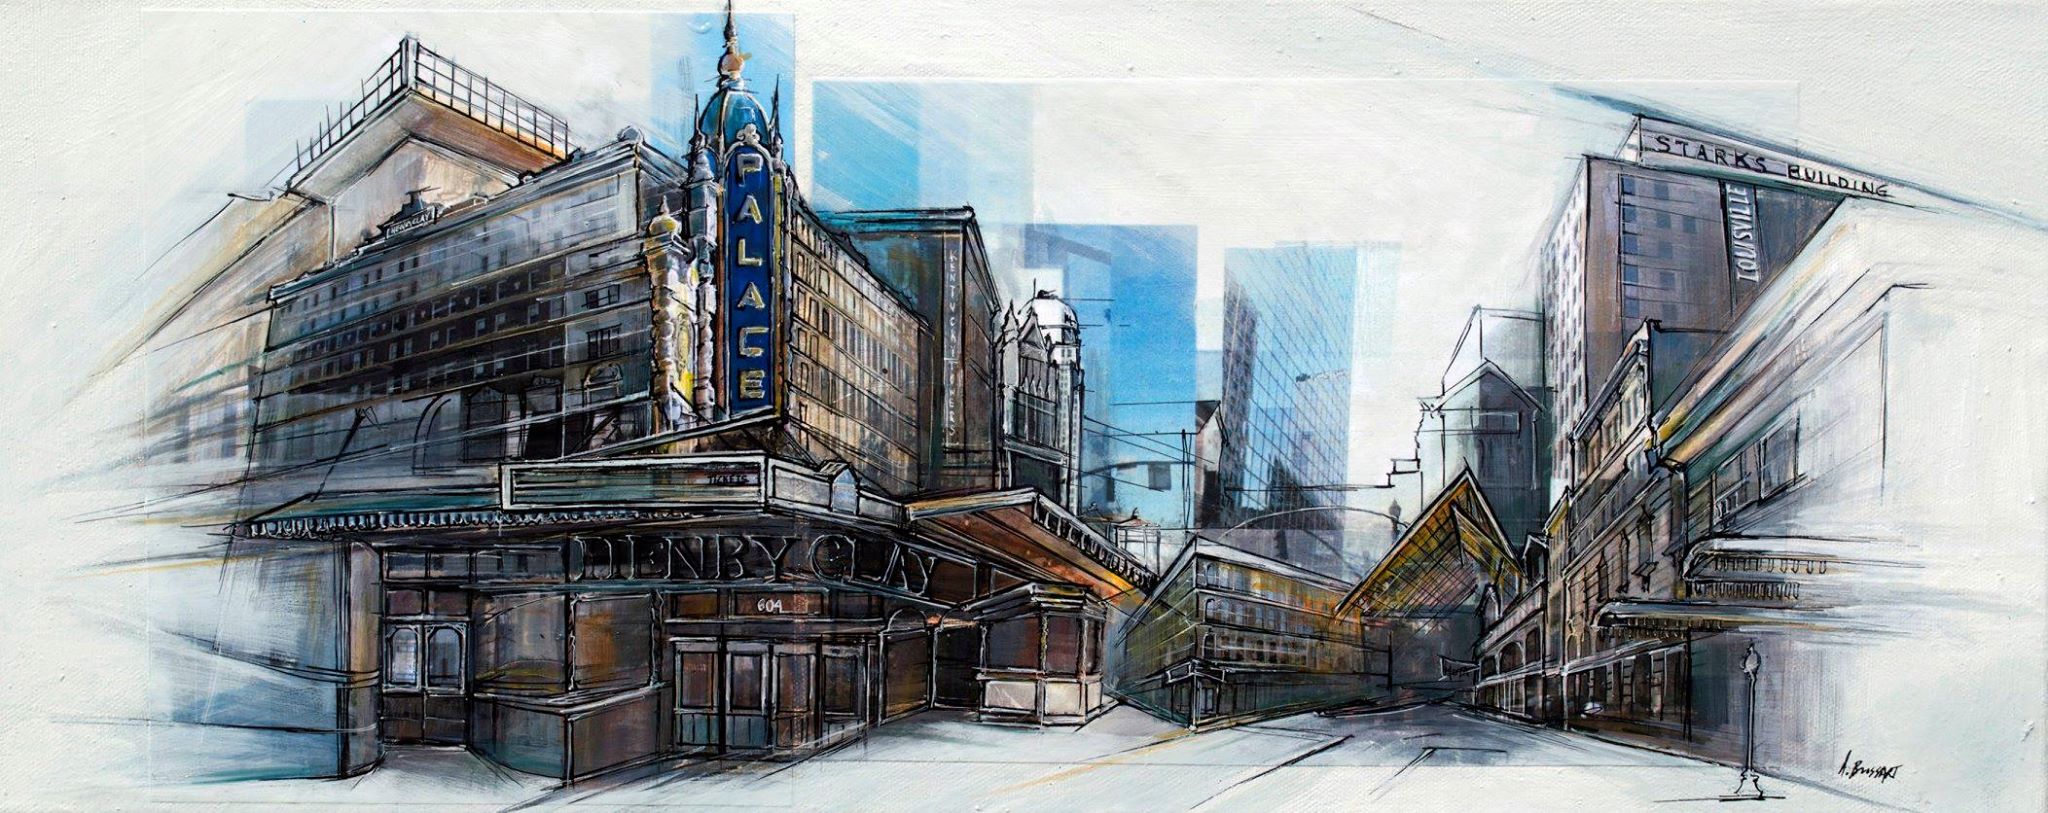 The City Is Alive In The Work Of Ashley Brossart